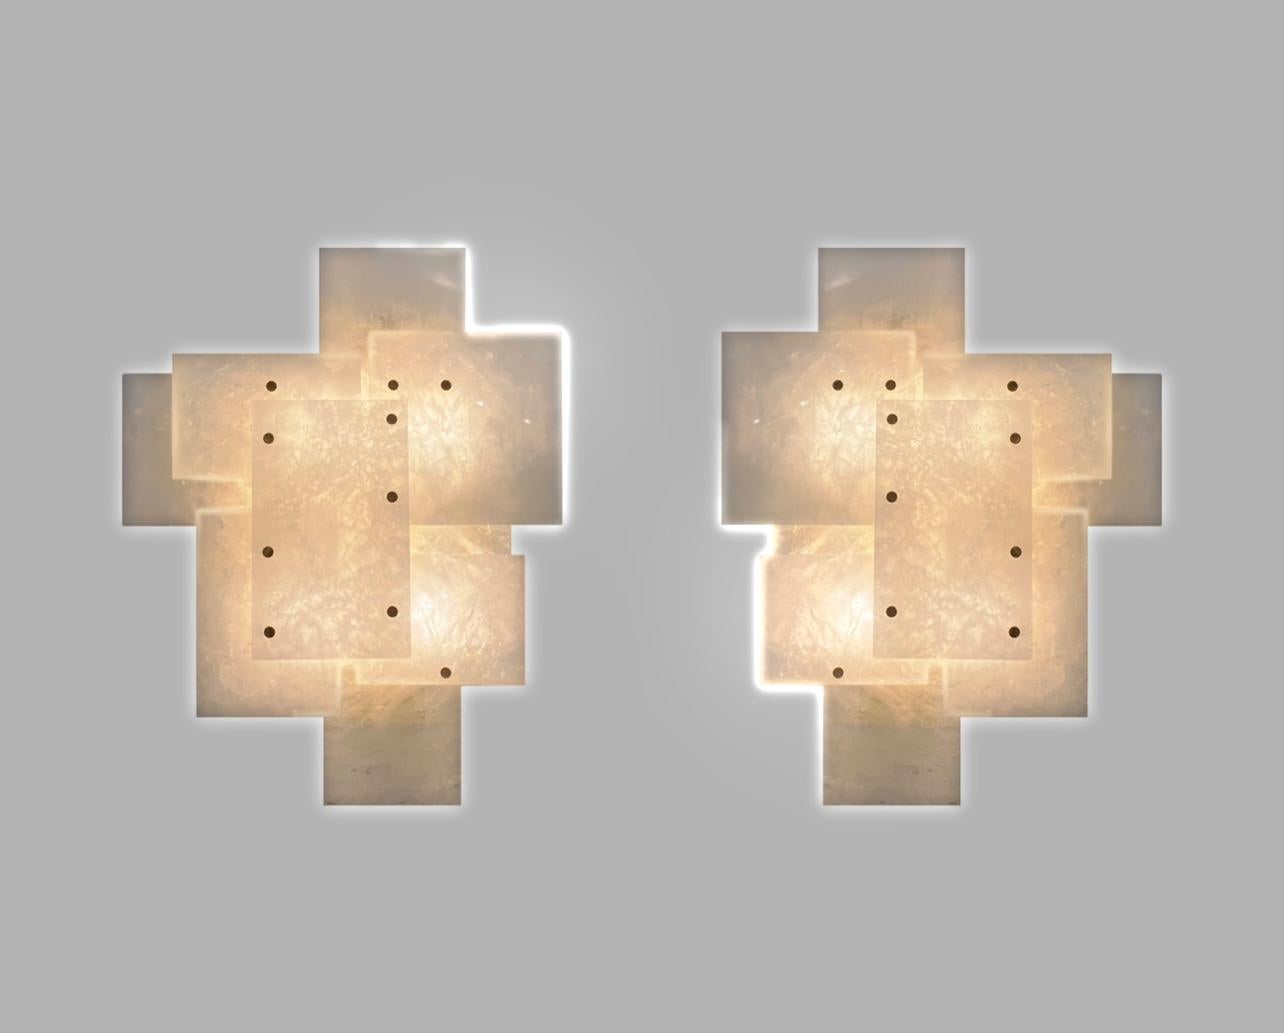 Pair of modern rock crystal quartz sconces with multiple panels decorations in polished brass finish. Created by Phoenix Gallery. Each sconce installed four sockets, use four 75 watts Led warm light bulbs, 300watts total. Light bulbs supplied.